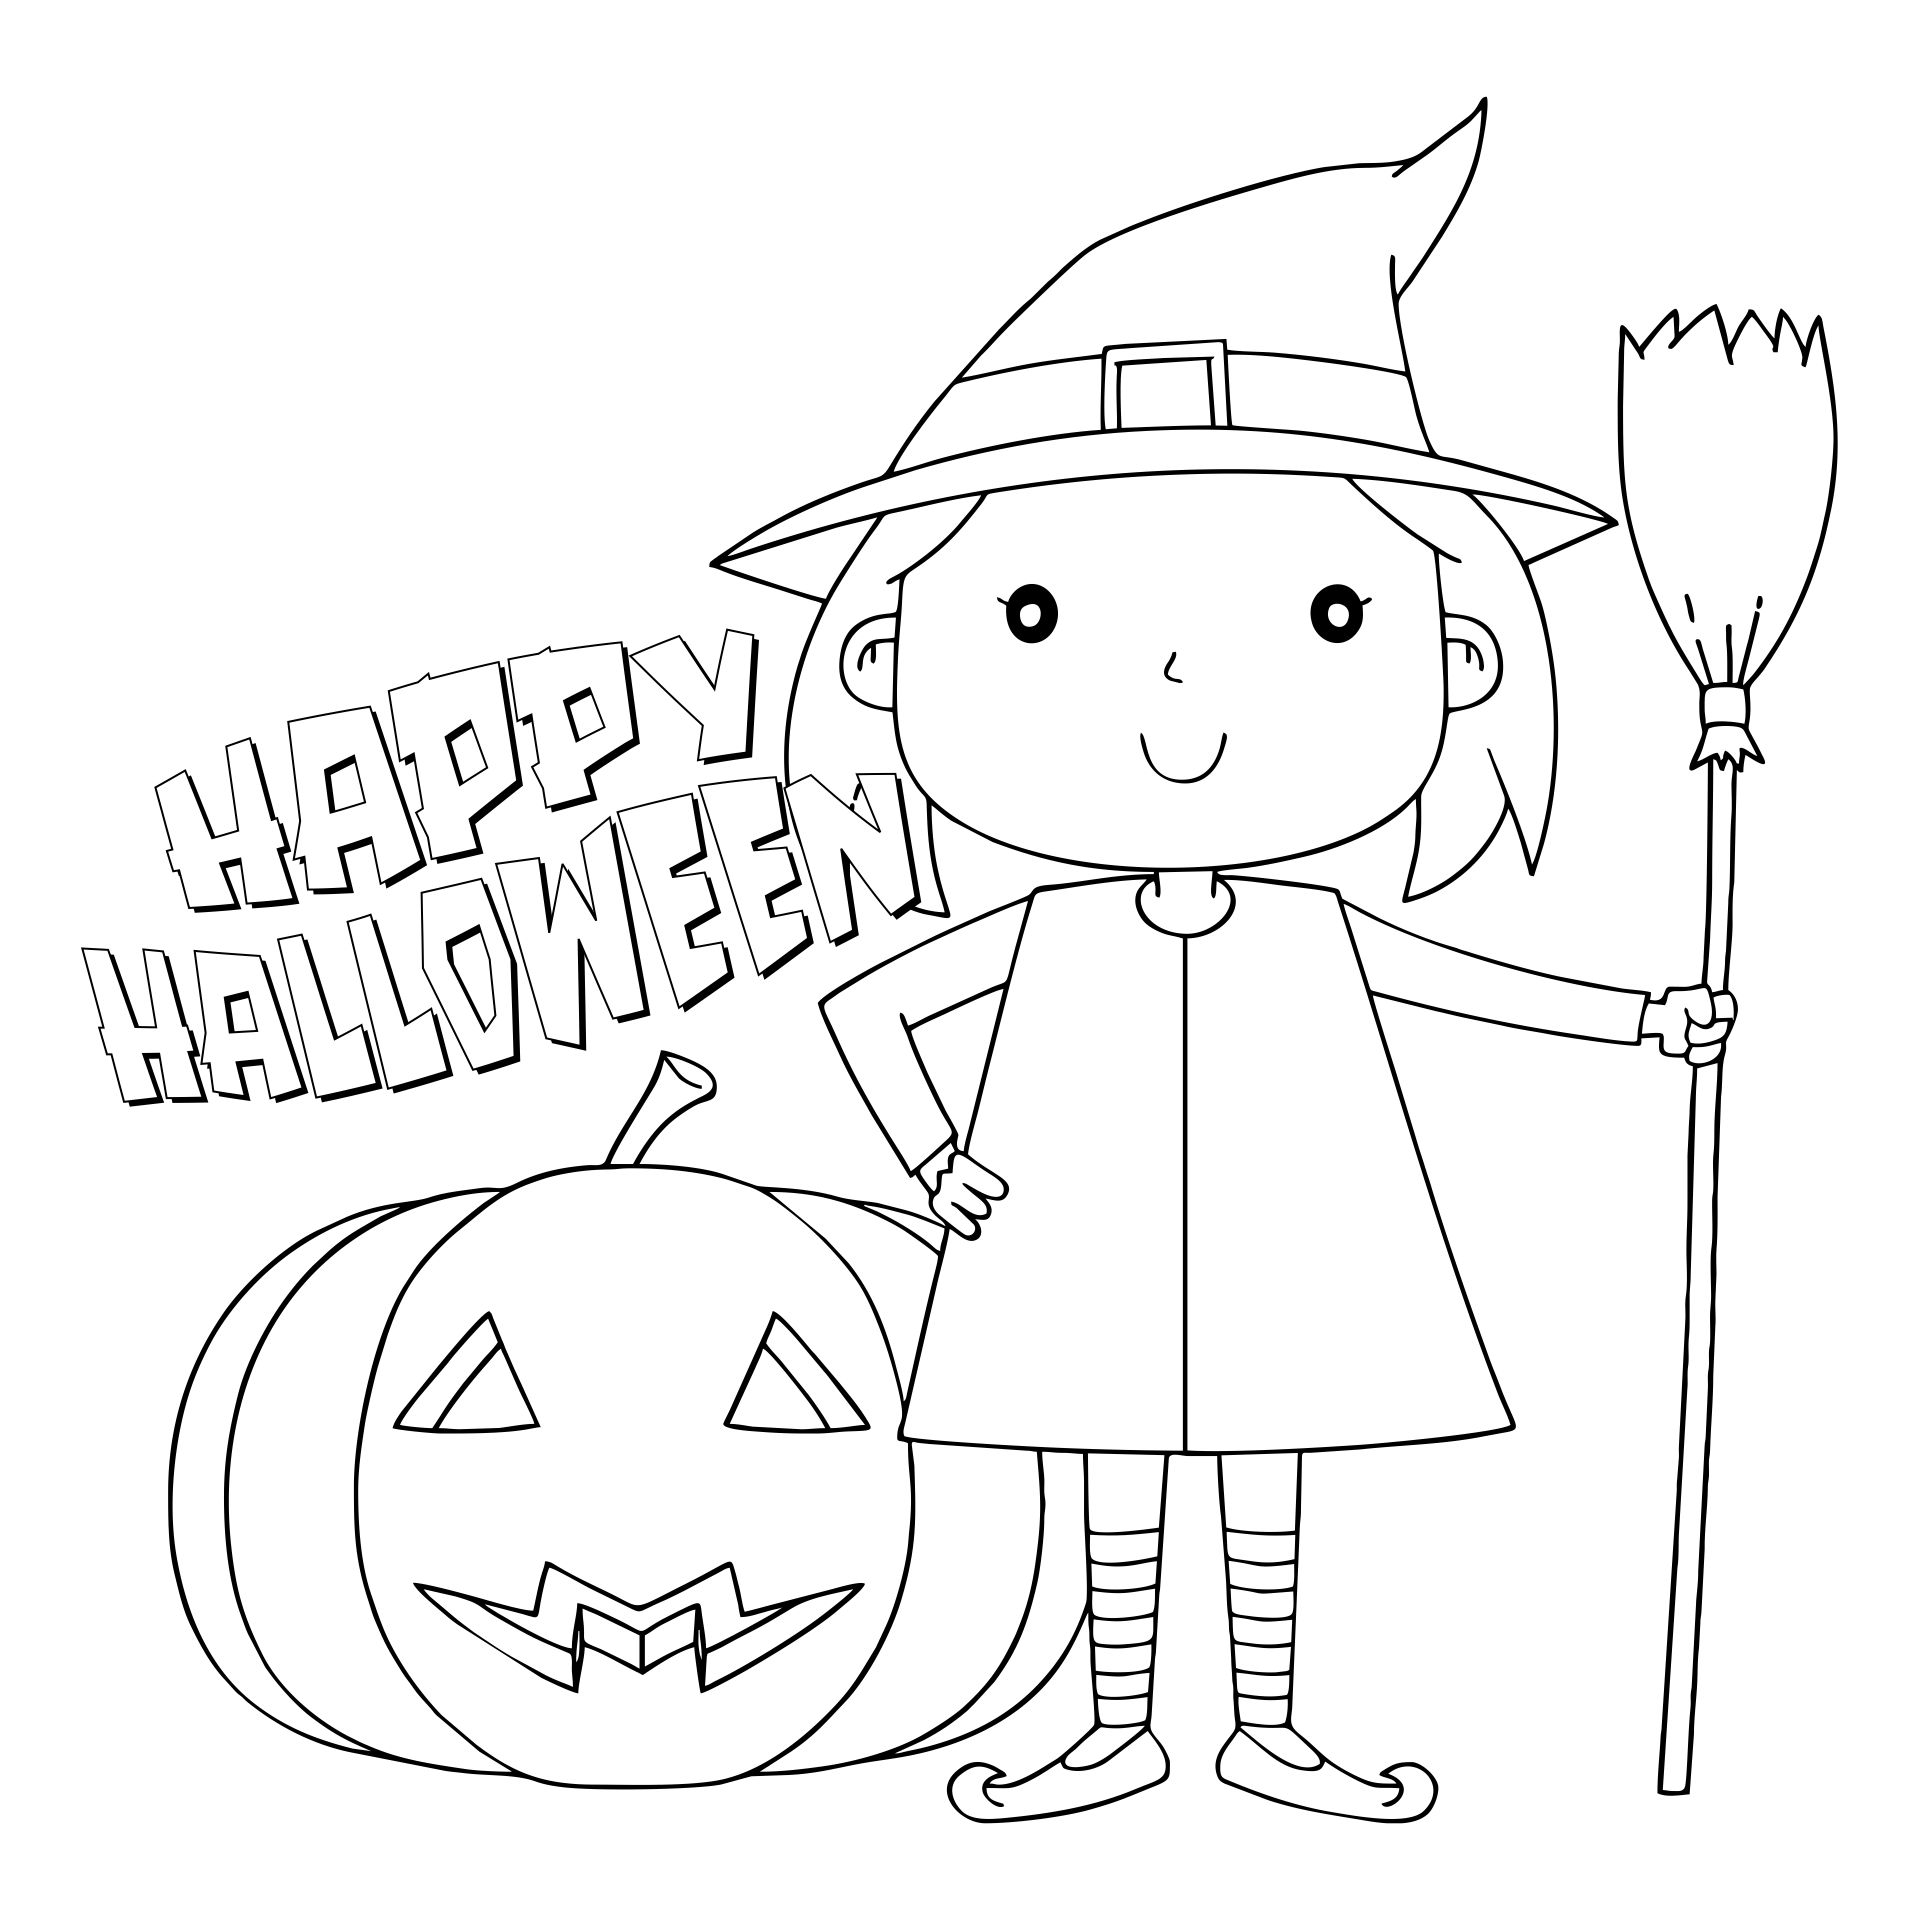 Happy Halloween And Pretty Witch Coloring Page For Kids